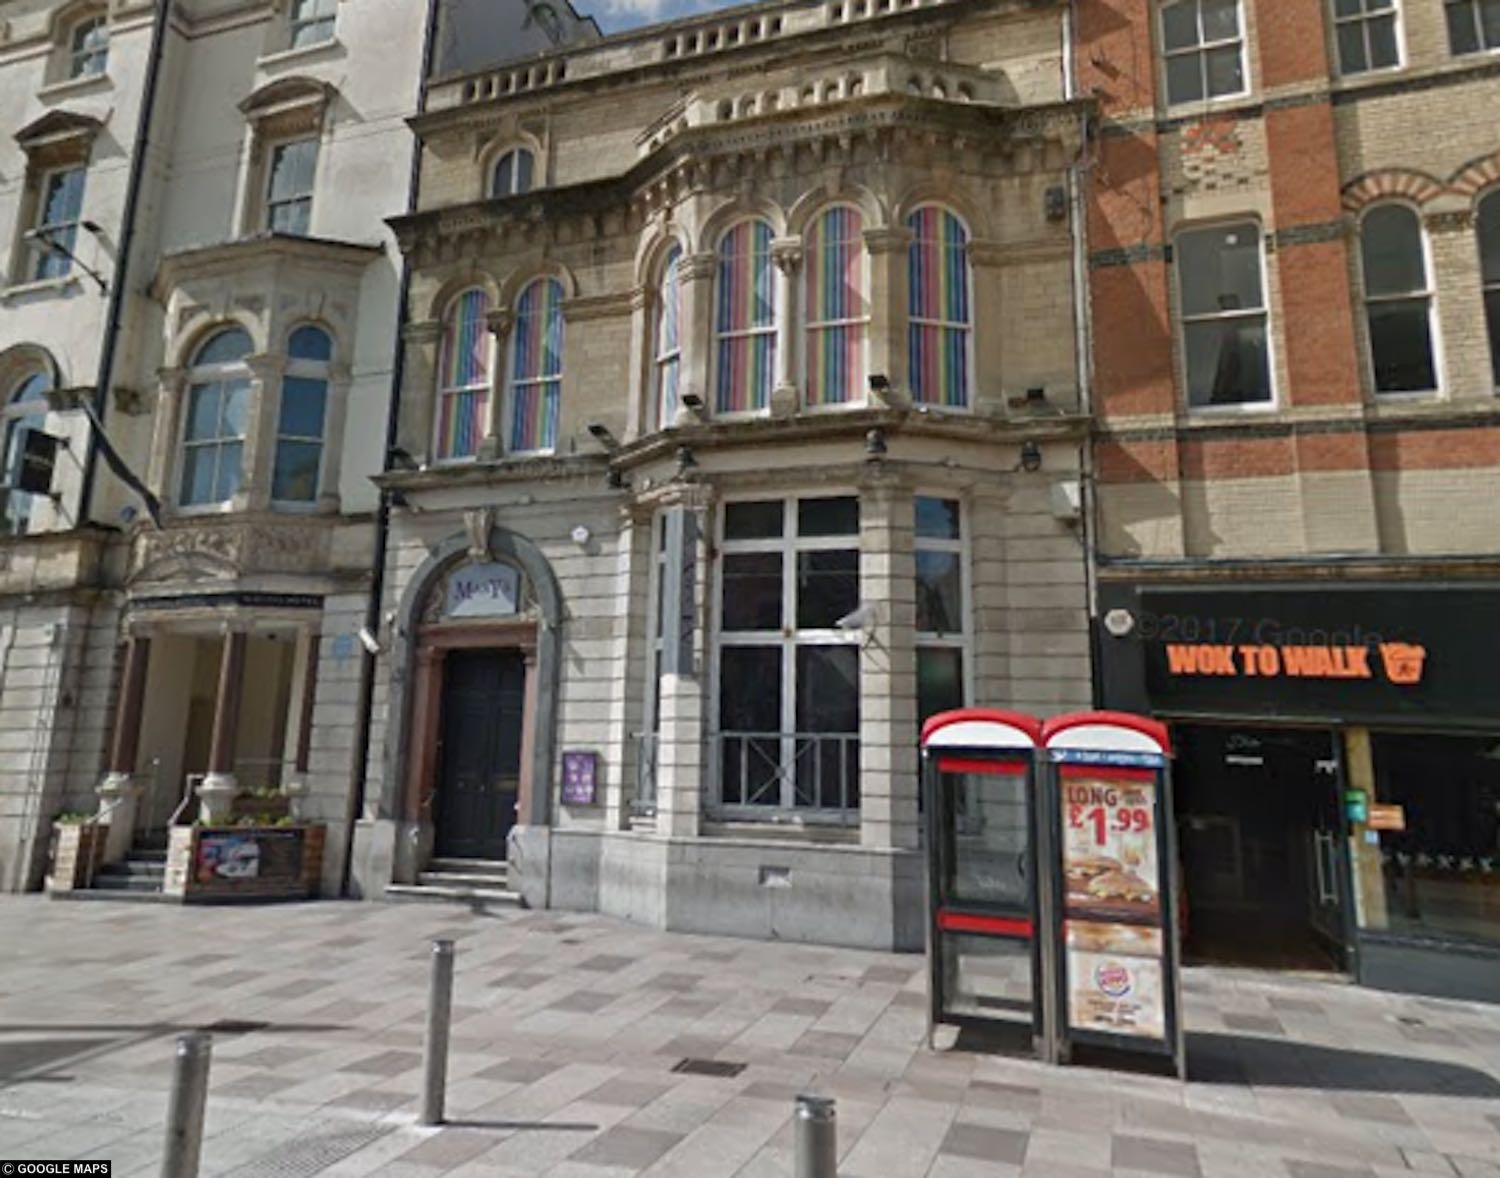 New 10 PM closure curfew restrictions force this LGBT+ bar to close